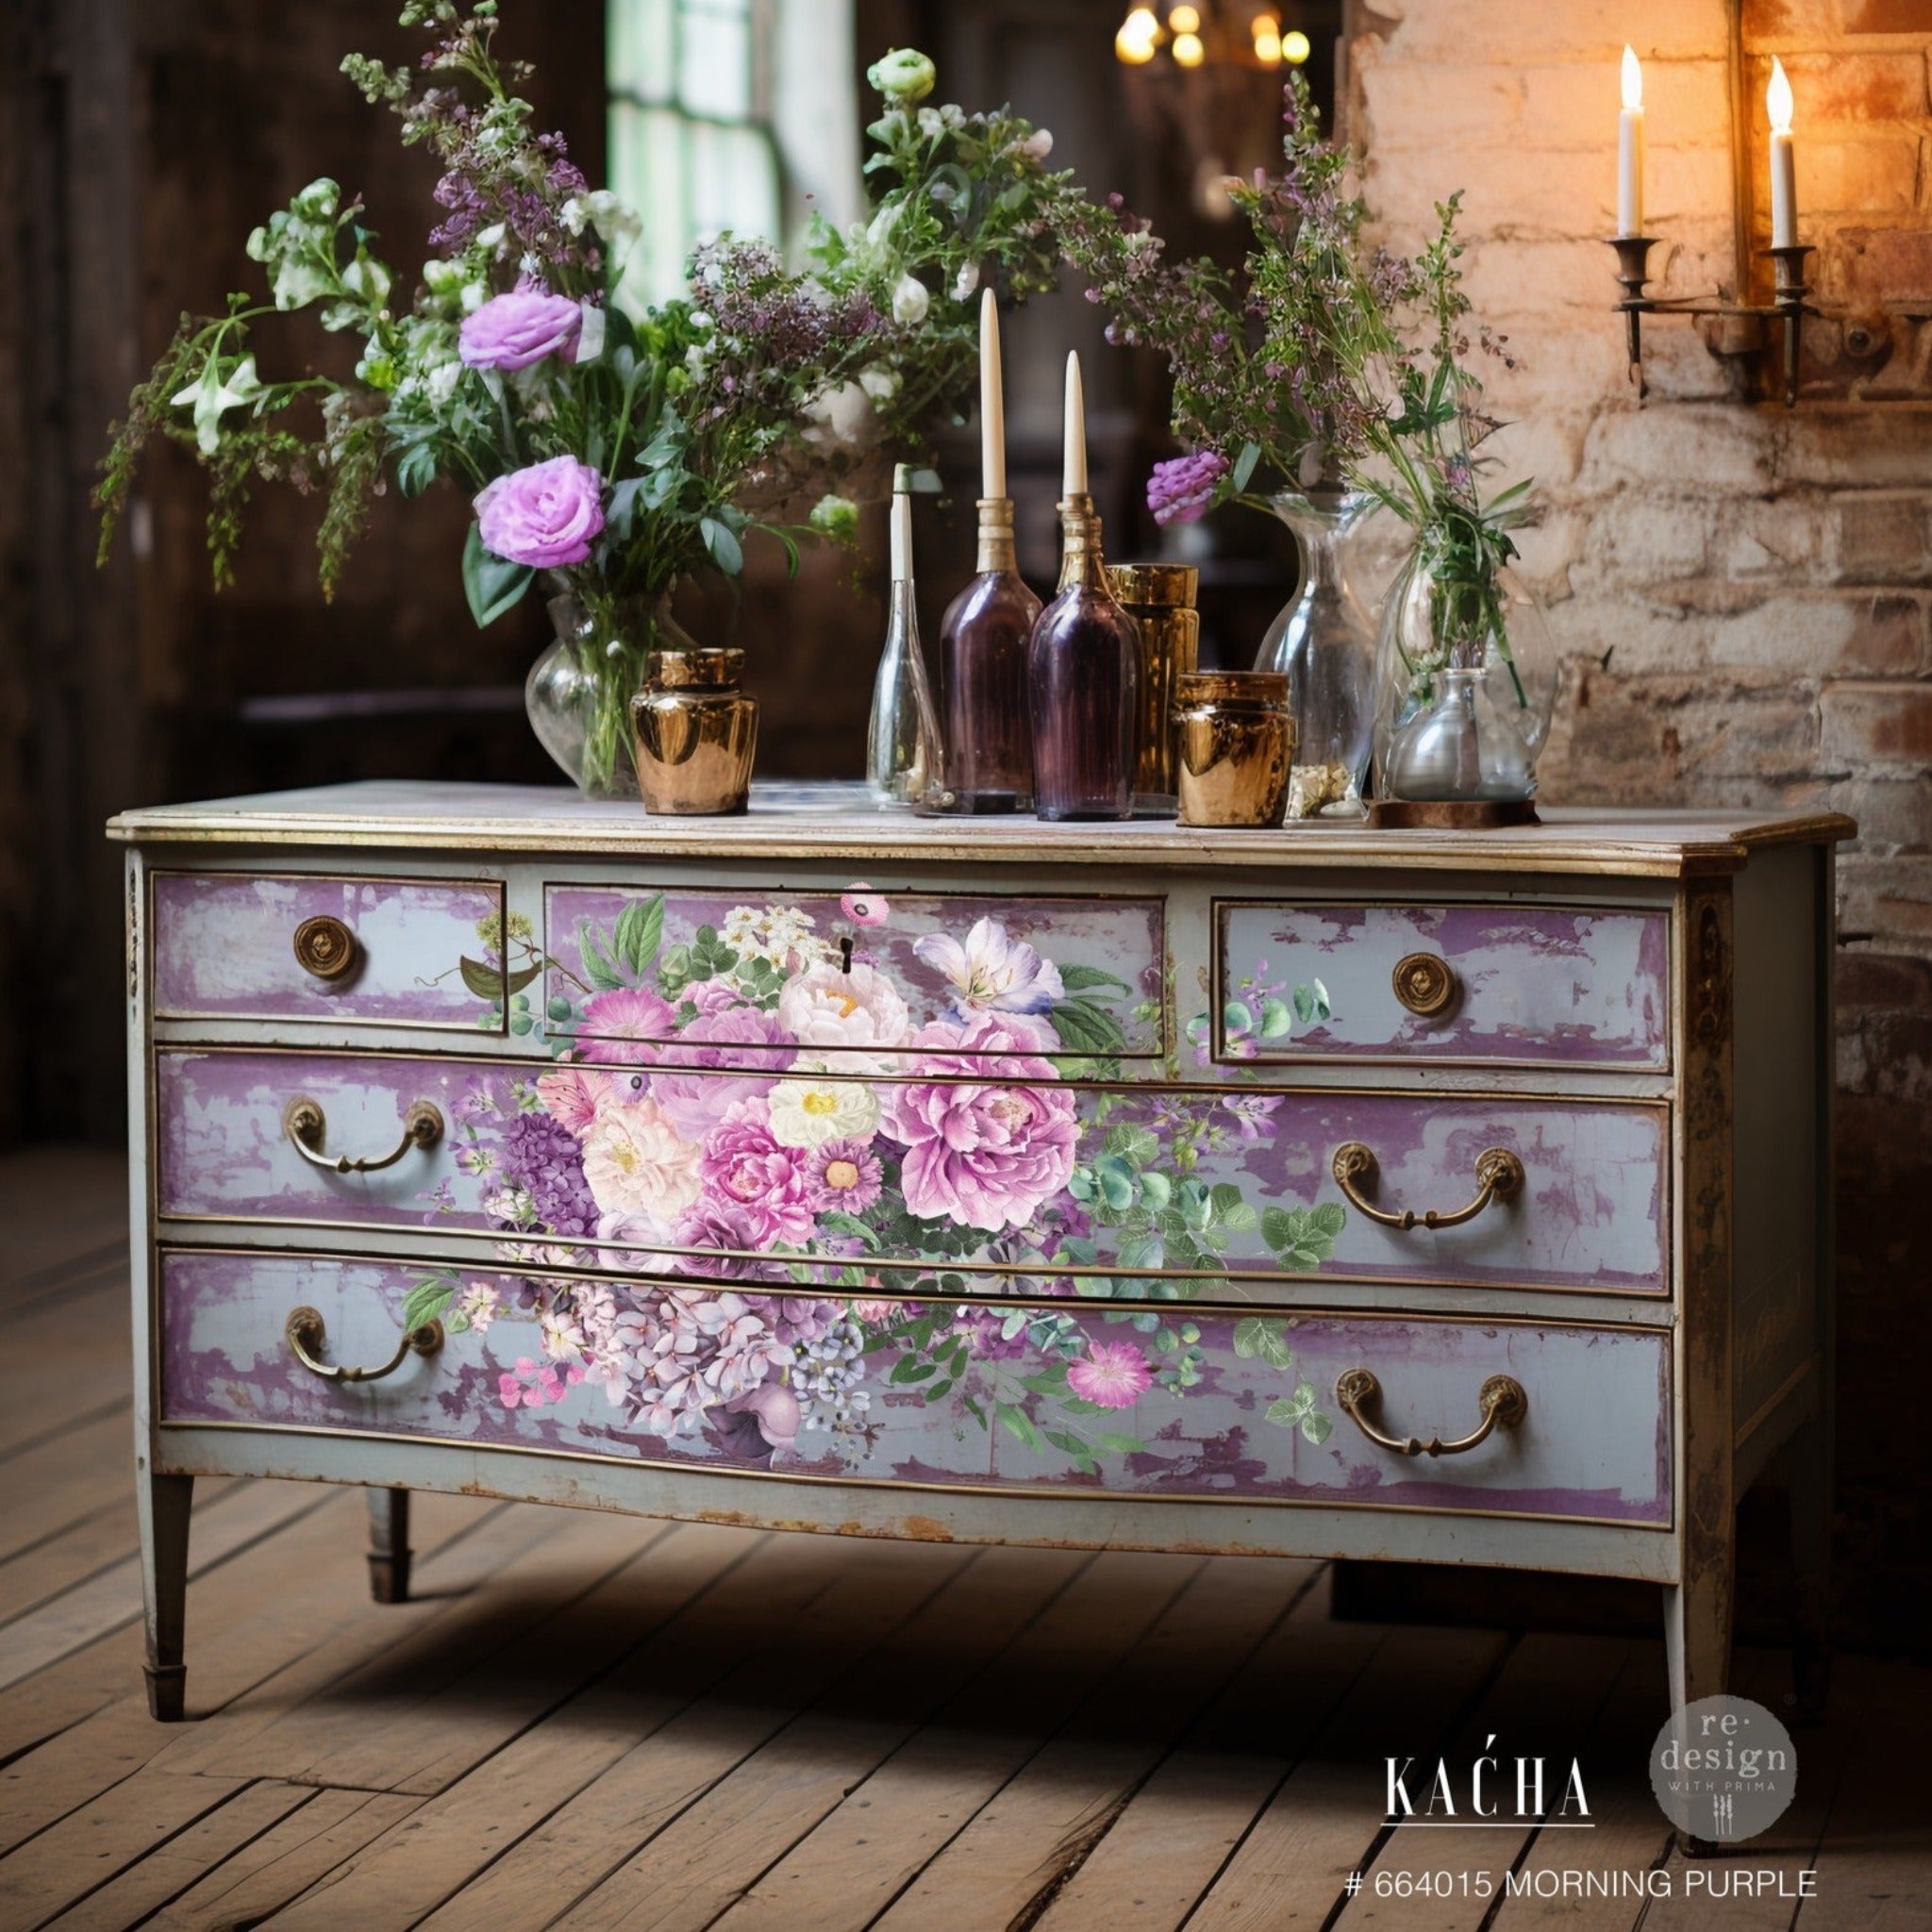 A large vintage dresser is painted a blend of light blue and lavender and features ReDesign with Prima's Kacha Morning Purple transfer in the center of the front of the drawers.